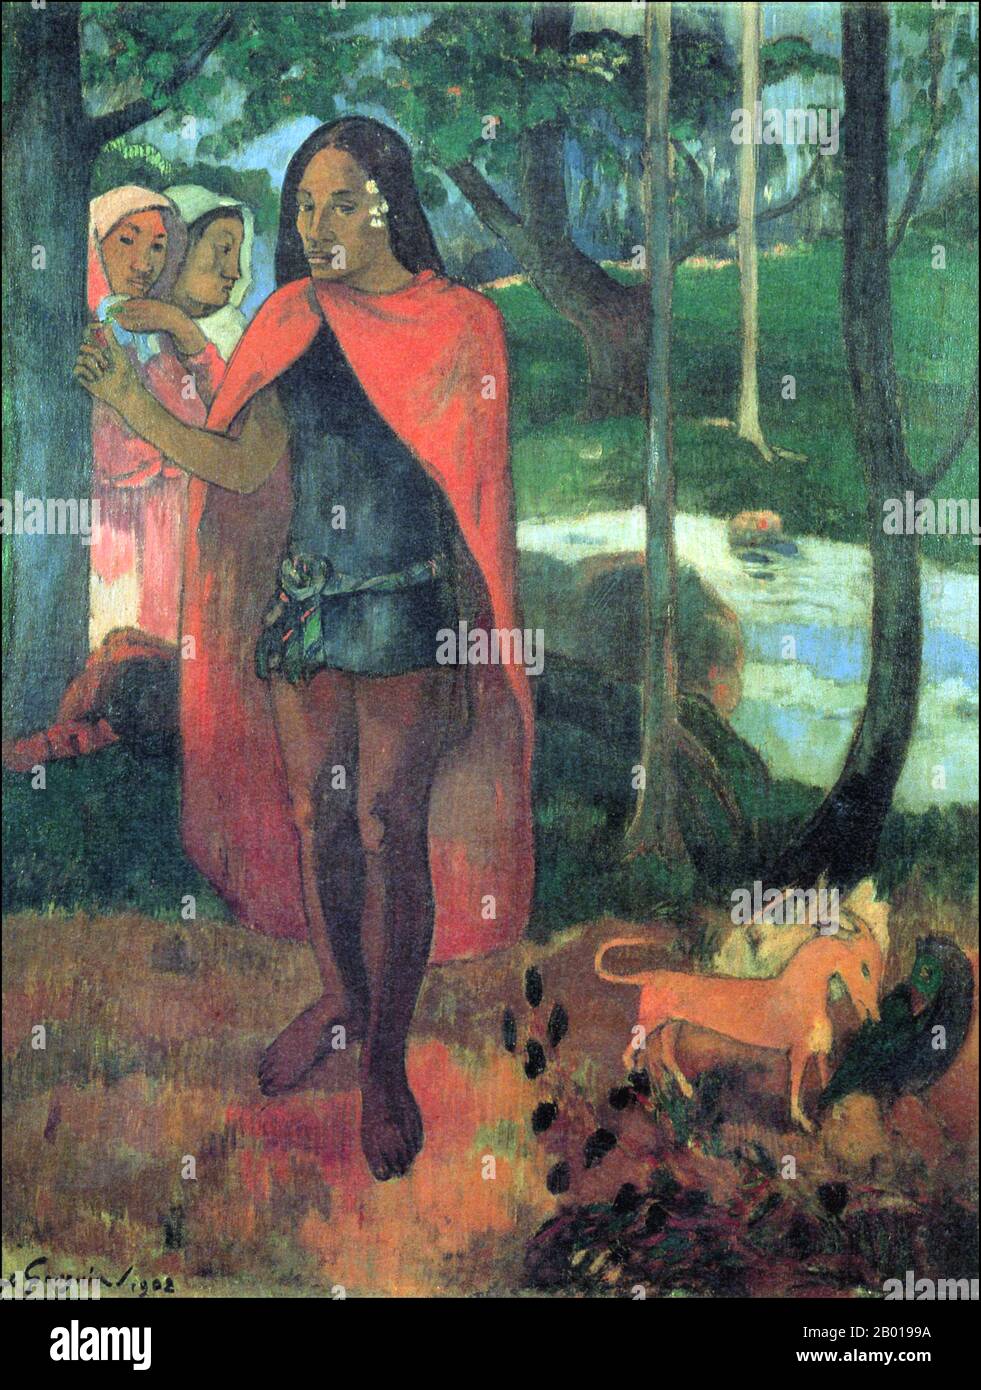 Marquesas Islands: 'Le Sorcier d'Hiva-Oa' (The Sorcerer of Hiva Oa'). Oil on canvas painting by Paul Gauguin (7 June 1848 - 8 May 1903), 1902.  Hiva Oa is the second largest island in the Marquesas Islands, in French Polynesia, an overseas territory of France in the Pacific Ocean. It is the largest island of the Southern Marquesas group. Its name means “long ridgepole” in South Marquesan. The island is likely so named because of its long central ridge.  Paul Gauguin was born in Paris in 1848 and spent some of his childhood in Peru. He sailed to the tropics in 1891 to escape the Western world. Stock Photo